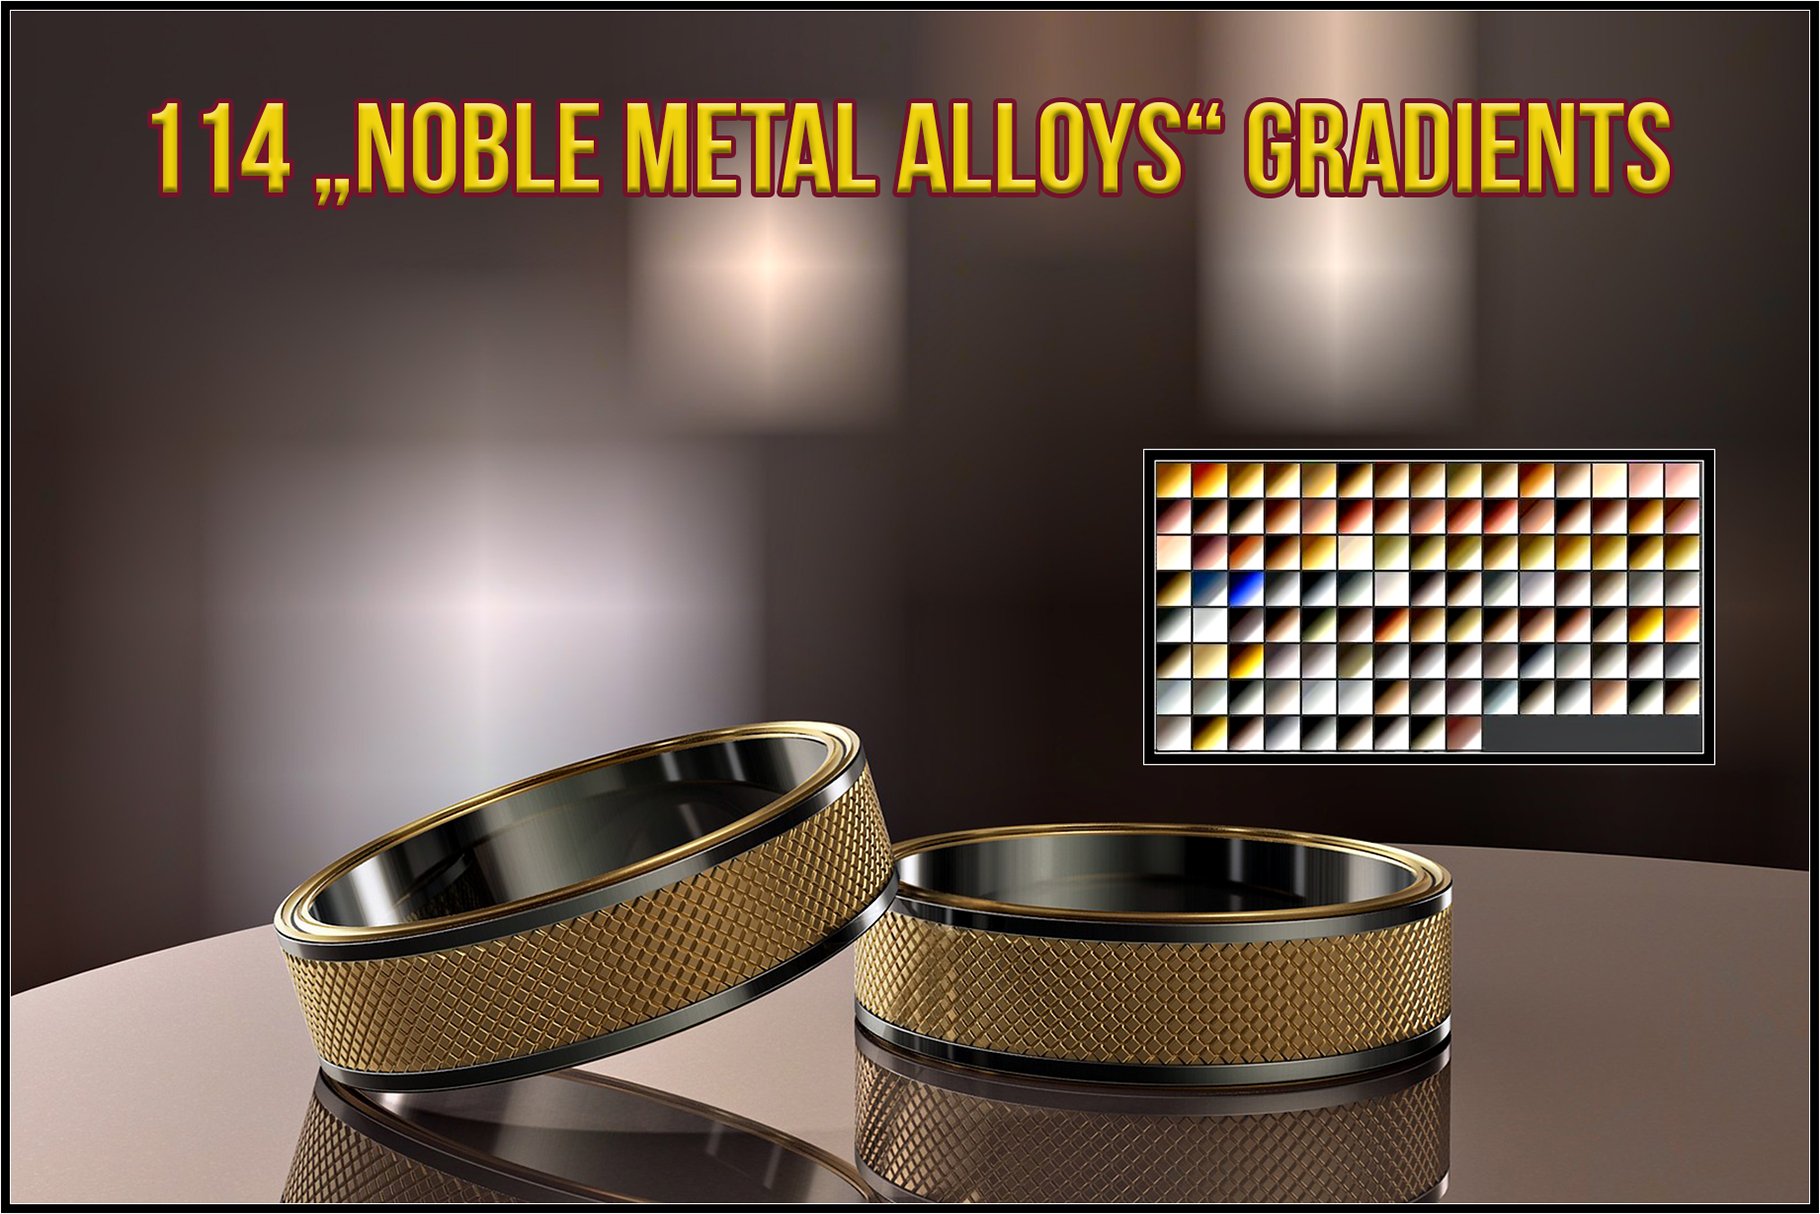 Noble Metal Alloys Gradientspreview image.